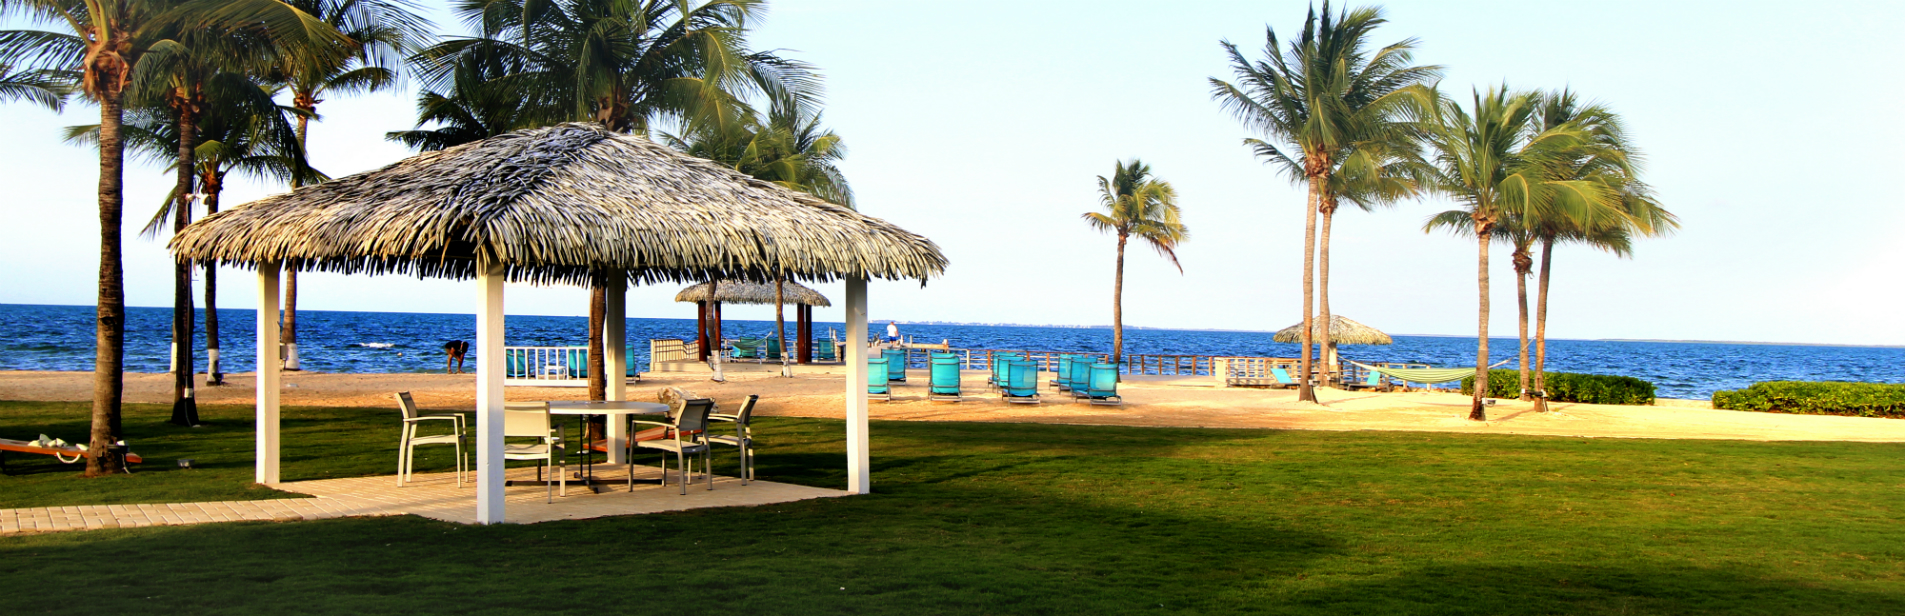 the grand caymanian resort photo gallery